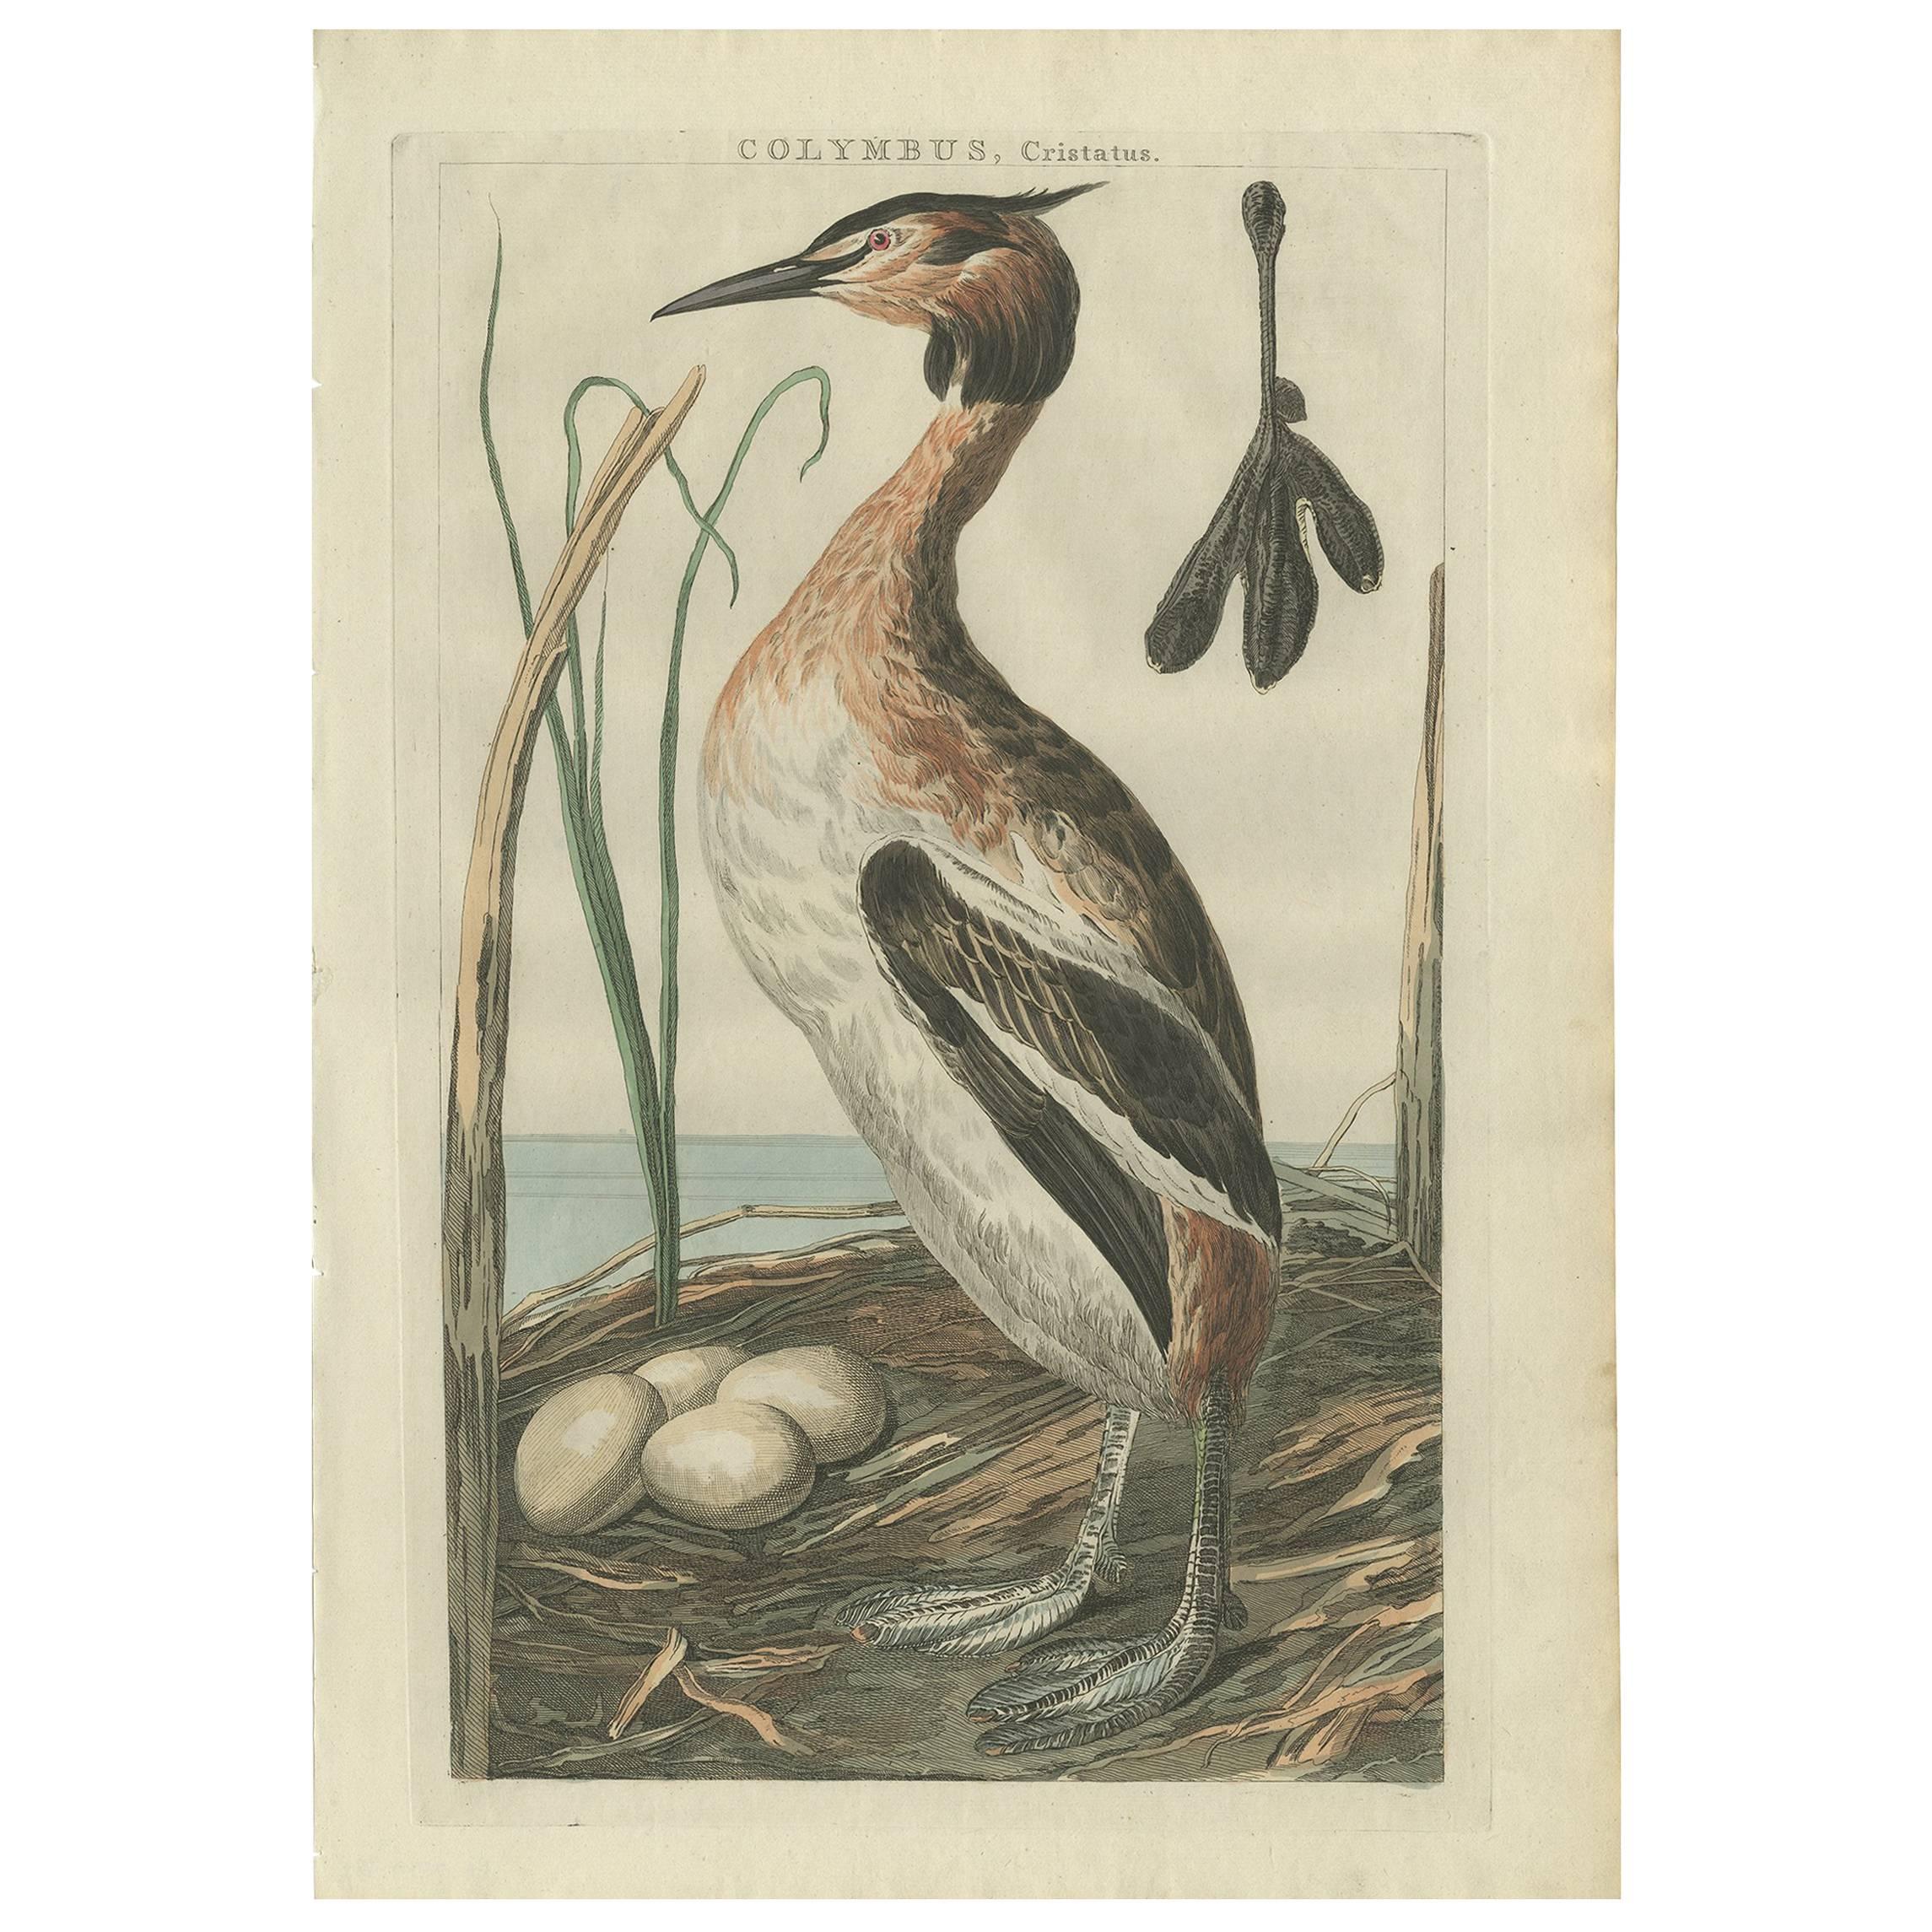 Antique Bird Print of the Great Crested Grebe by Sepp & Nozeman, 1789